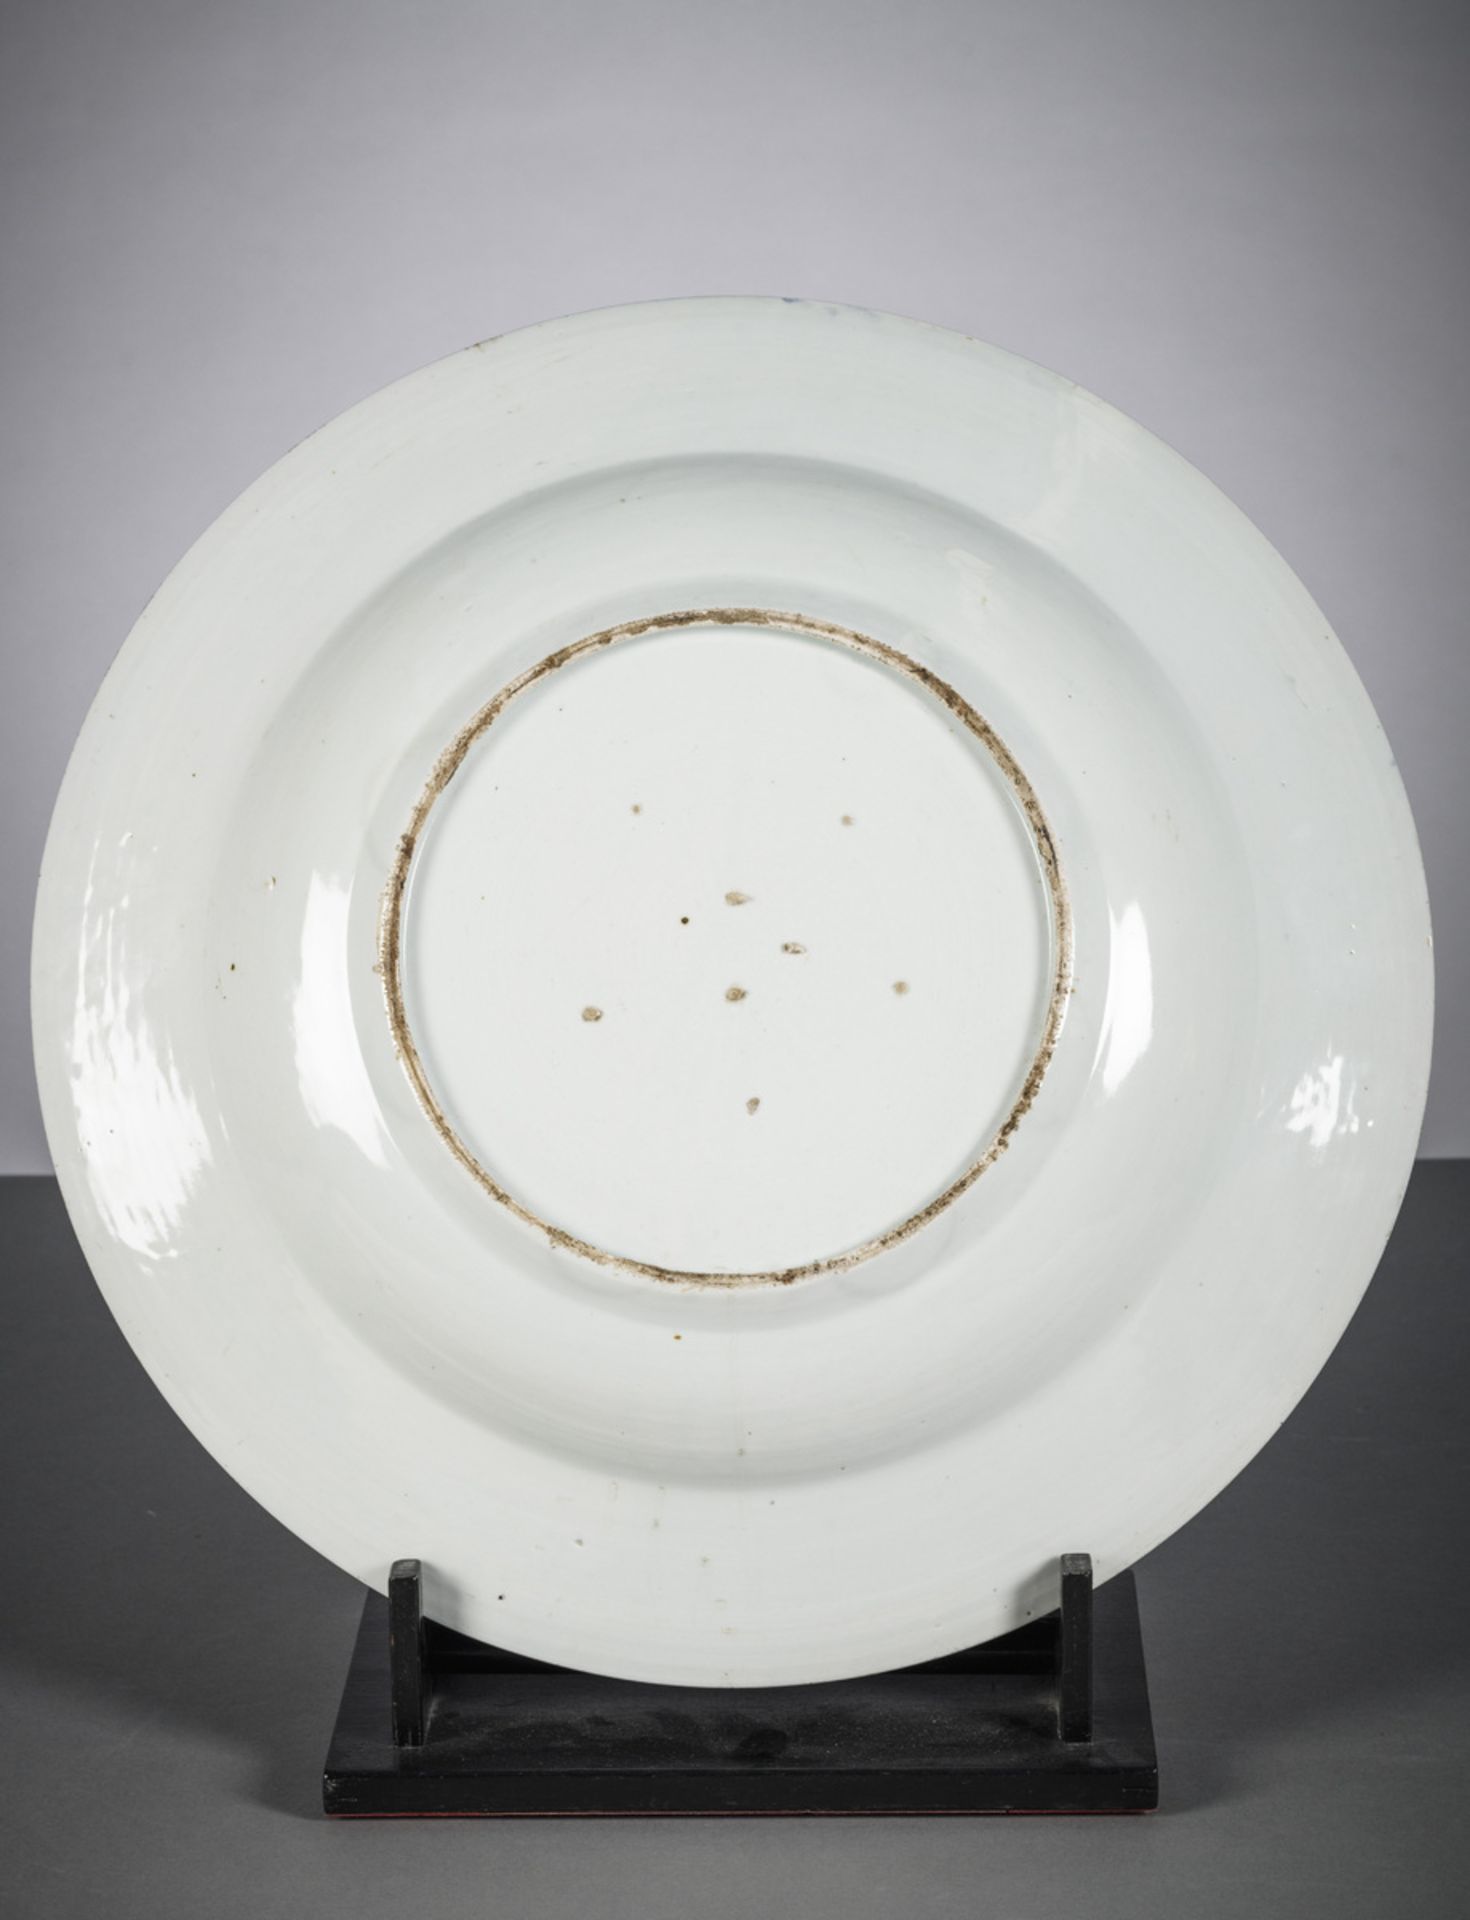 Exceptionally large dish in Japanese Arita porcelain, 17th/18th century (dia 55cm) - Image 2 of 5